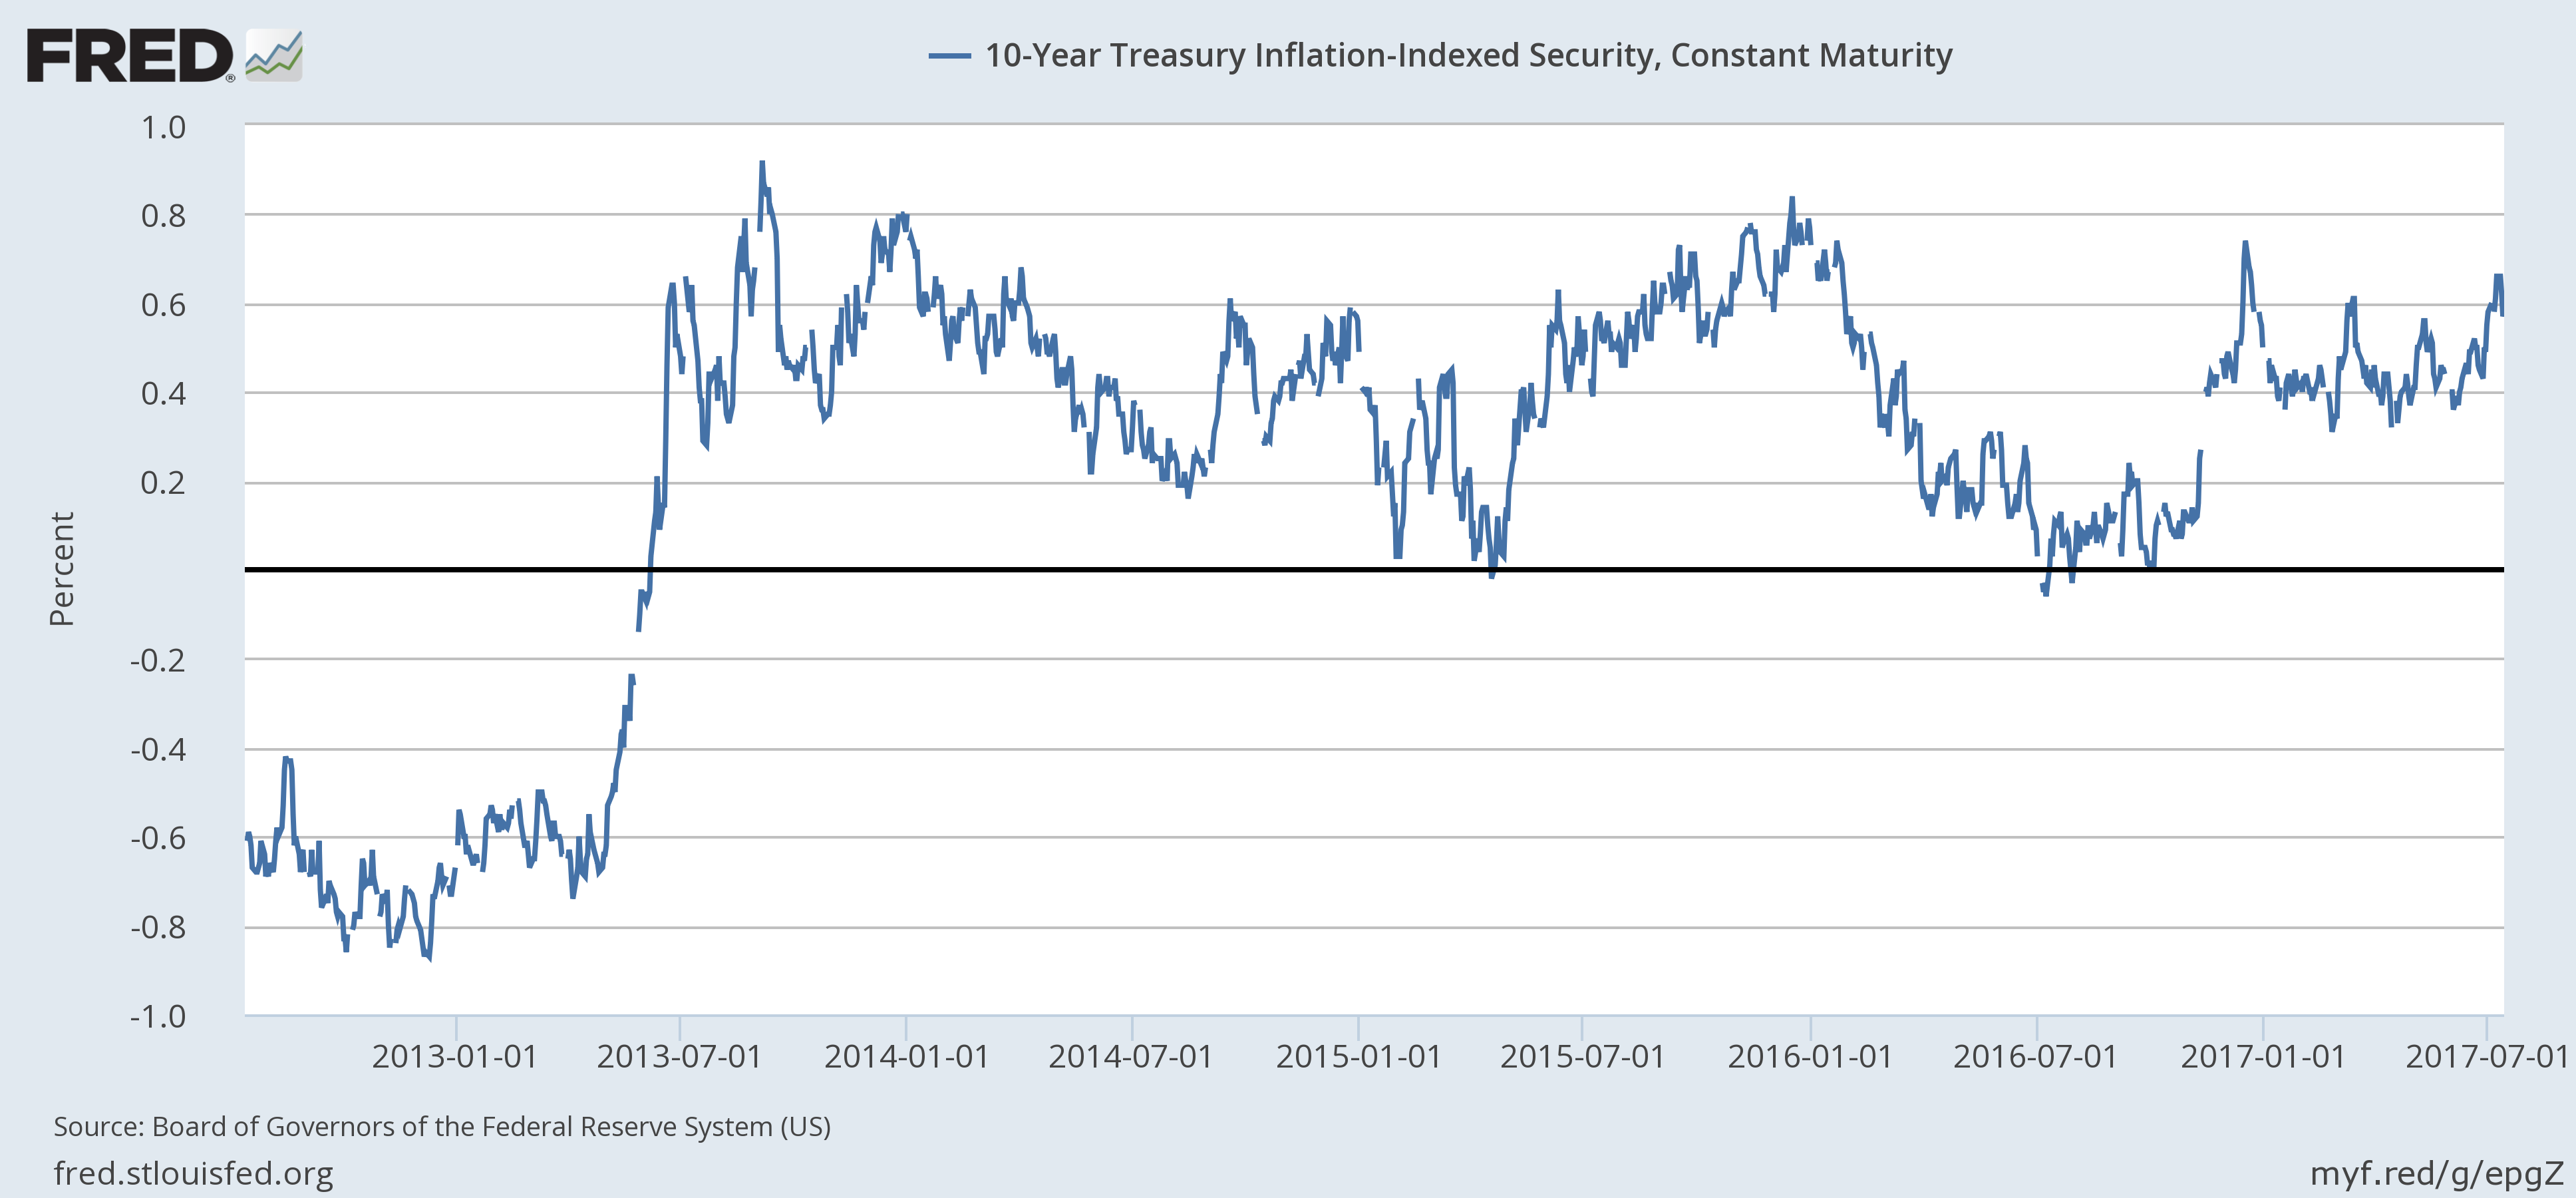 10-Year Treasury Inflation-Indexes Security Constant Maturity